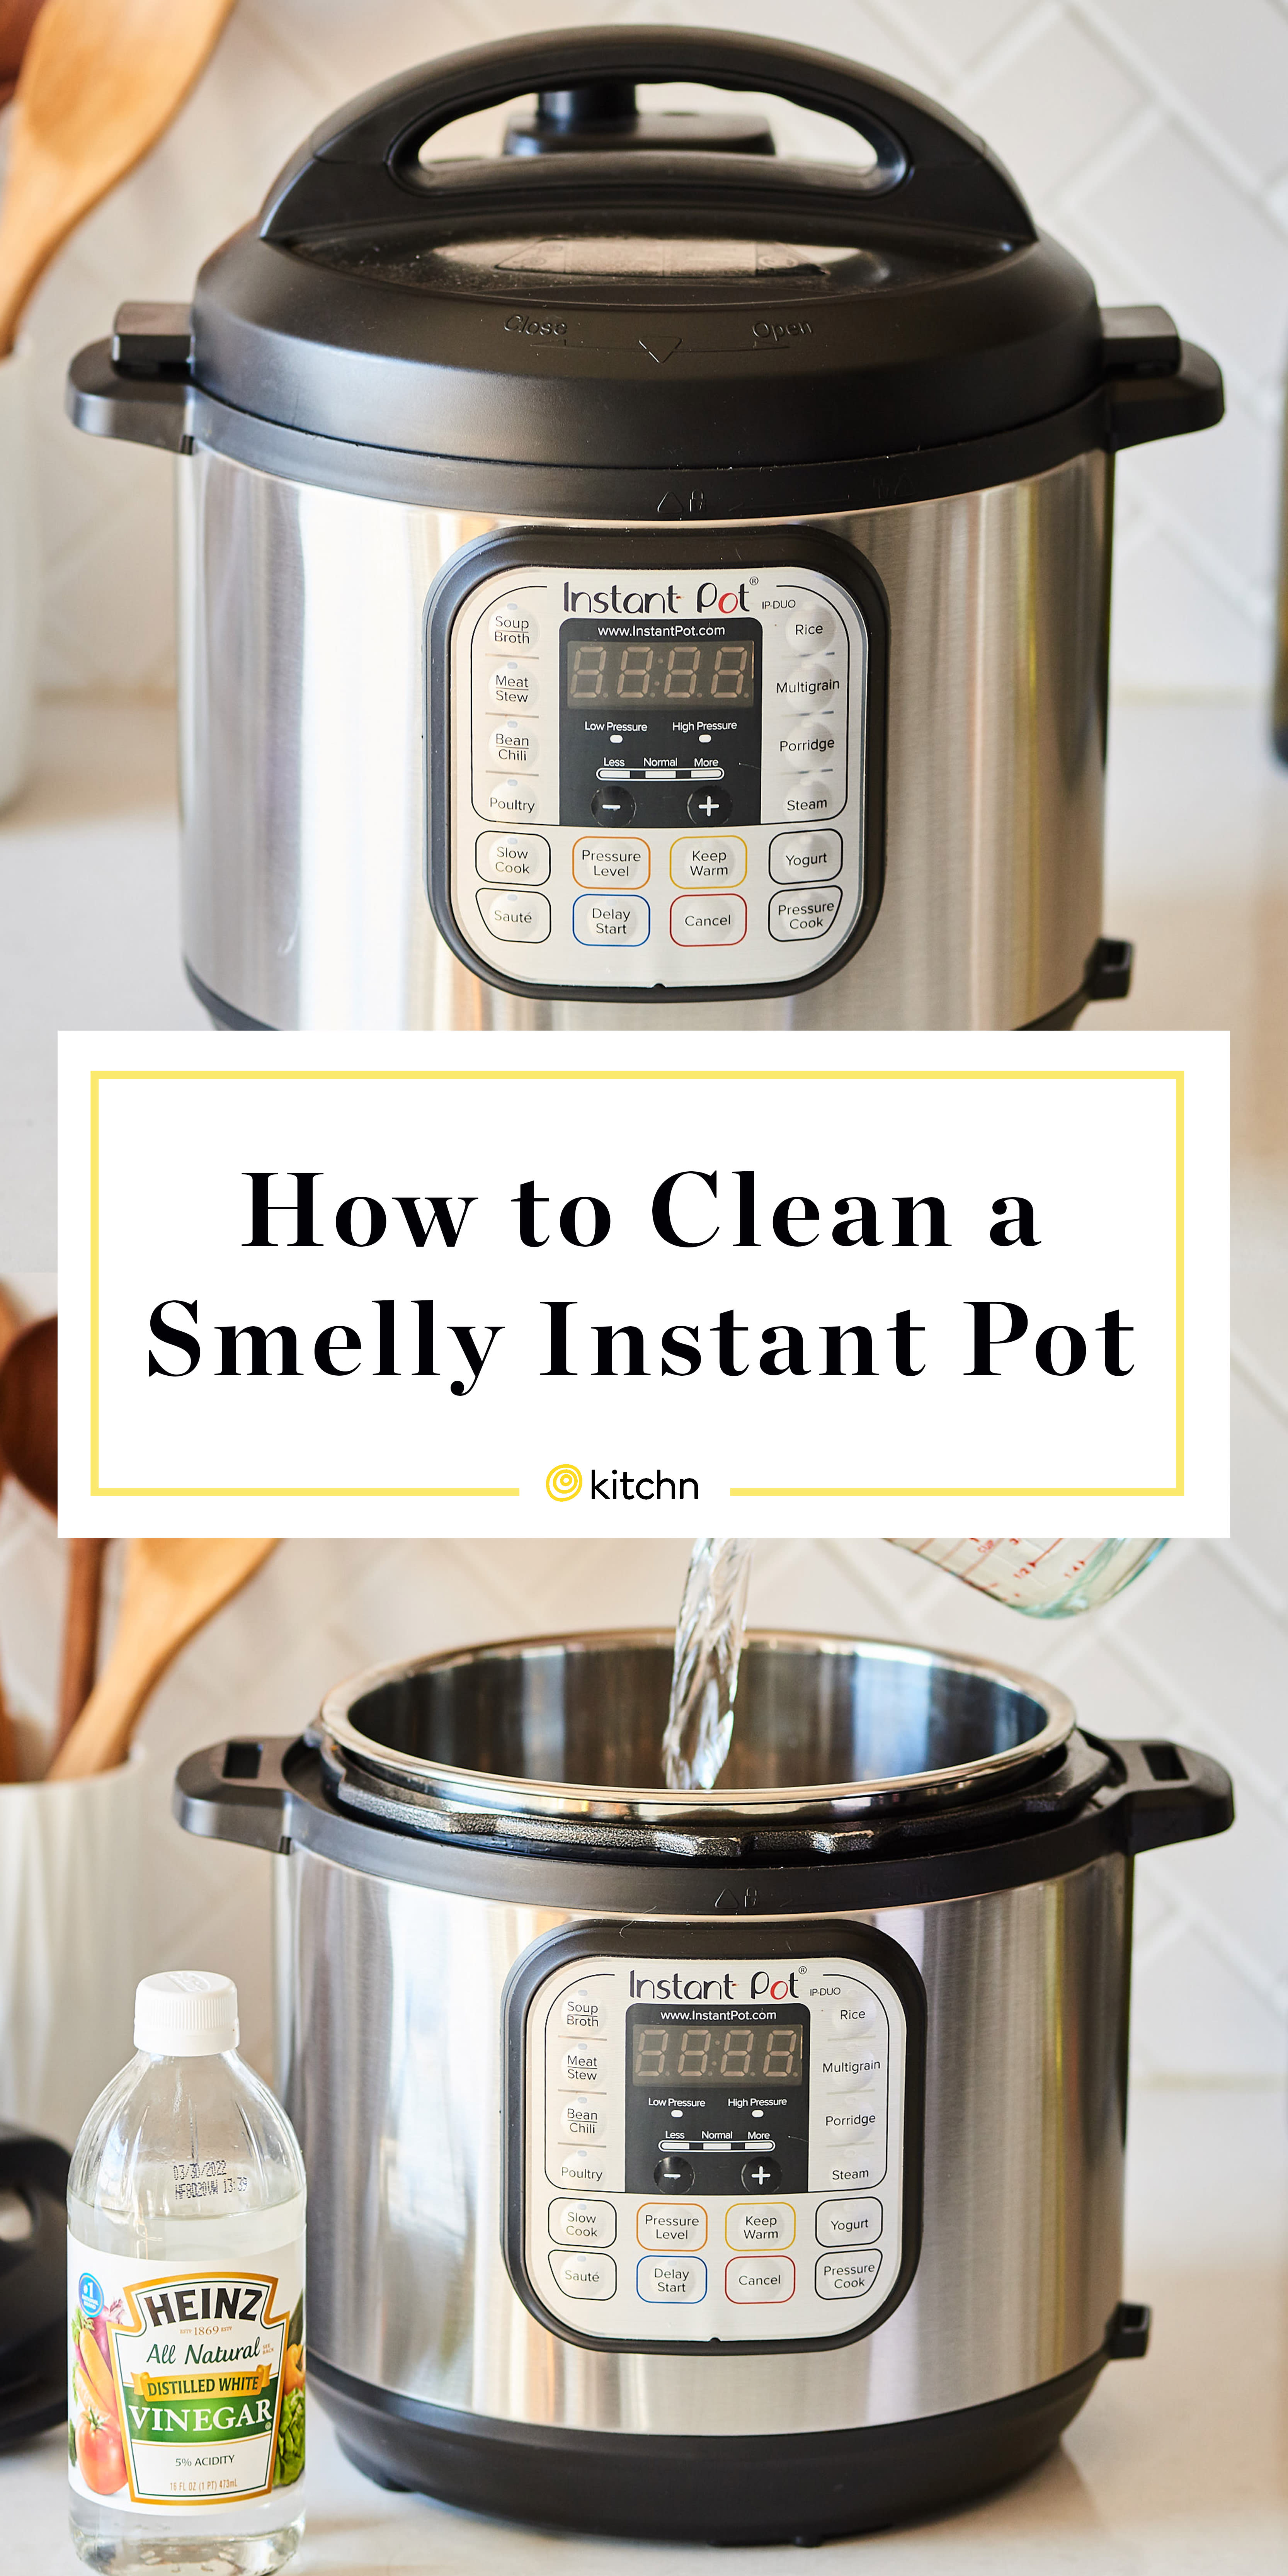 Instant Pot Sealing Ring - how to remove and replace 